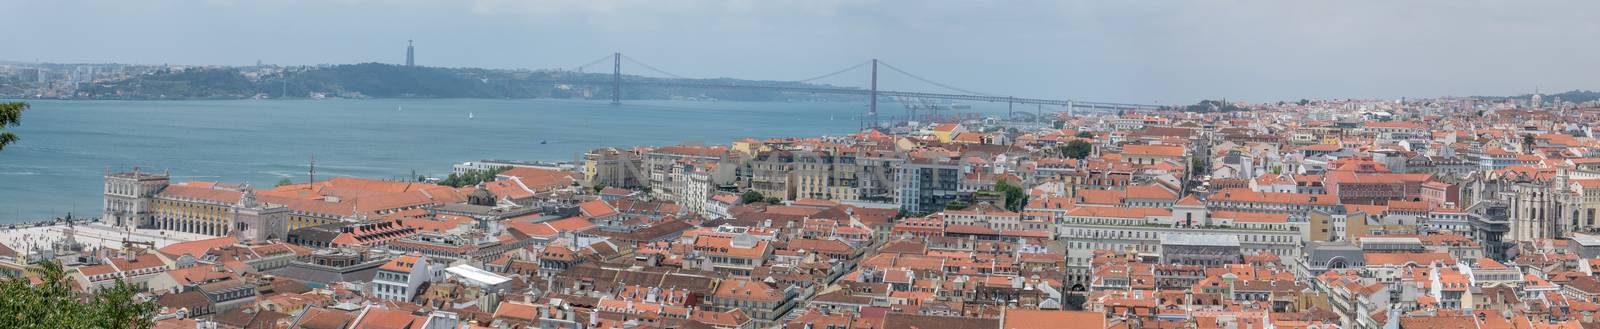 discovery of the city of Lisbon in Portugal. Romantic weekend in Europe. by shovag